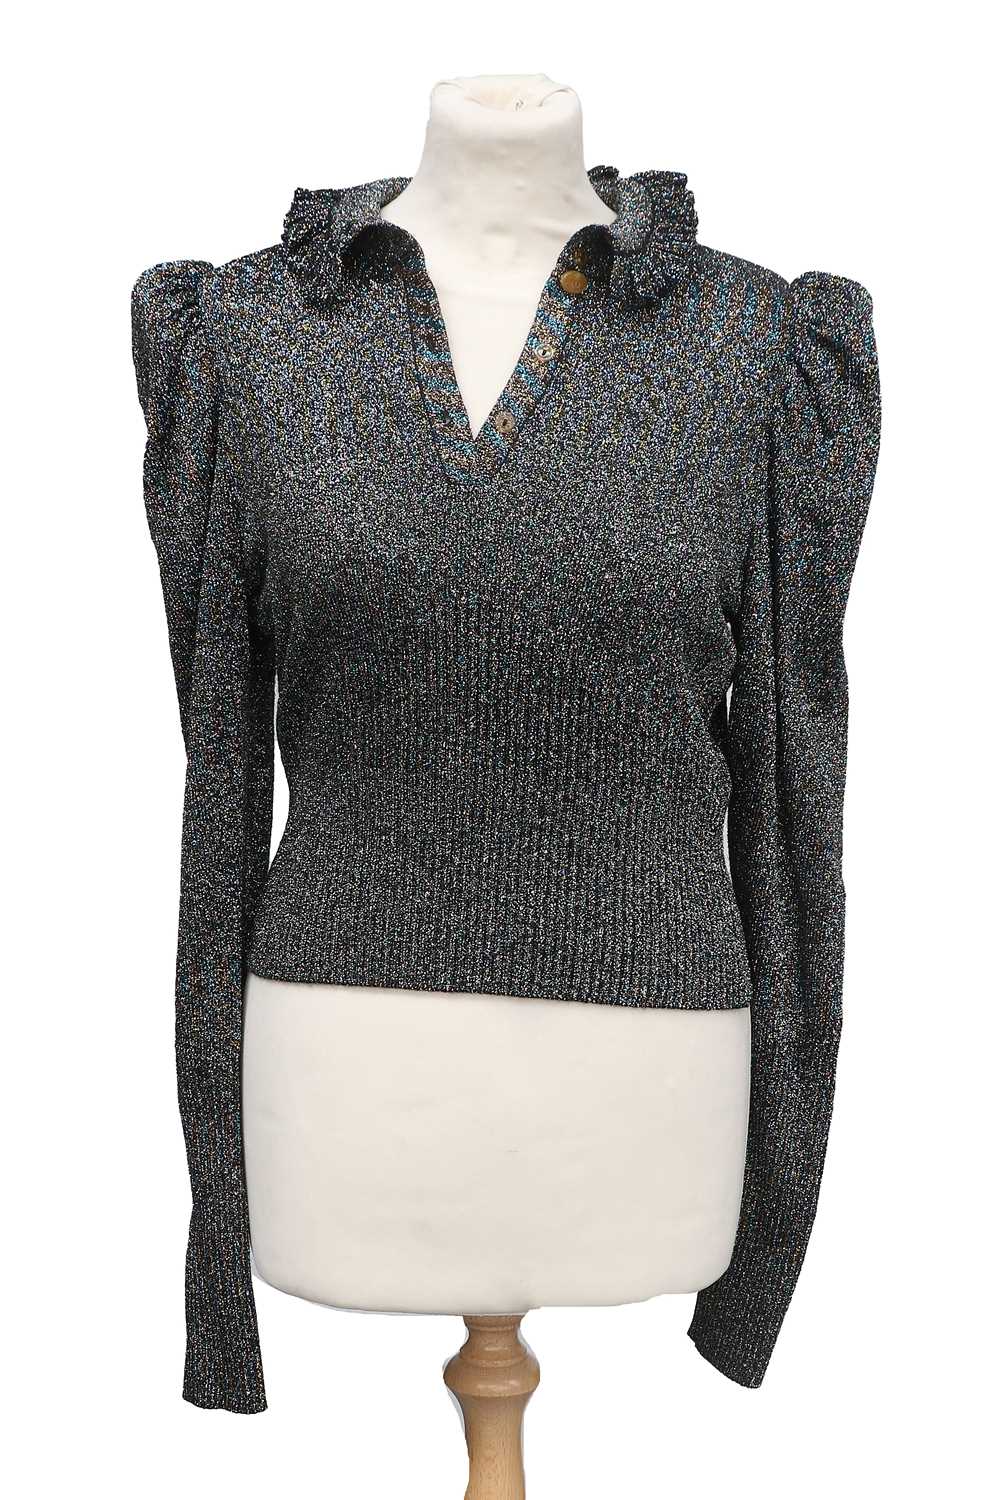 Circa 1990s Vivienne Westwood Knitwear Sparkly Knit Top, with a high frilled collar, button